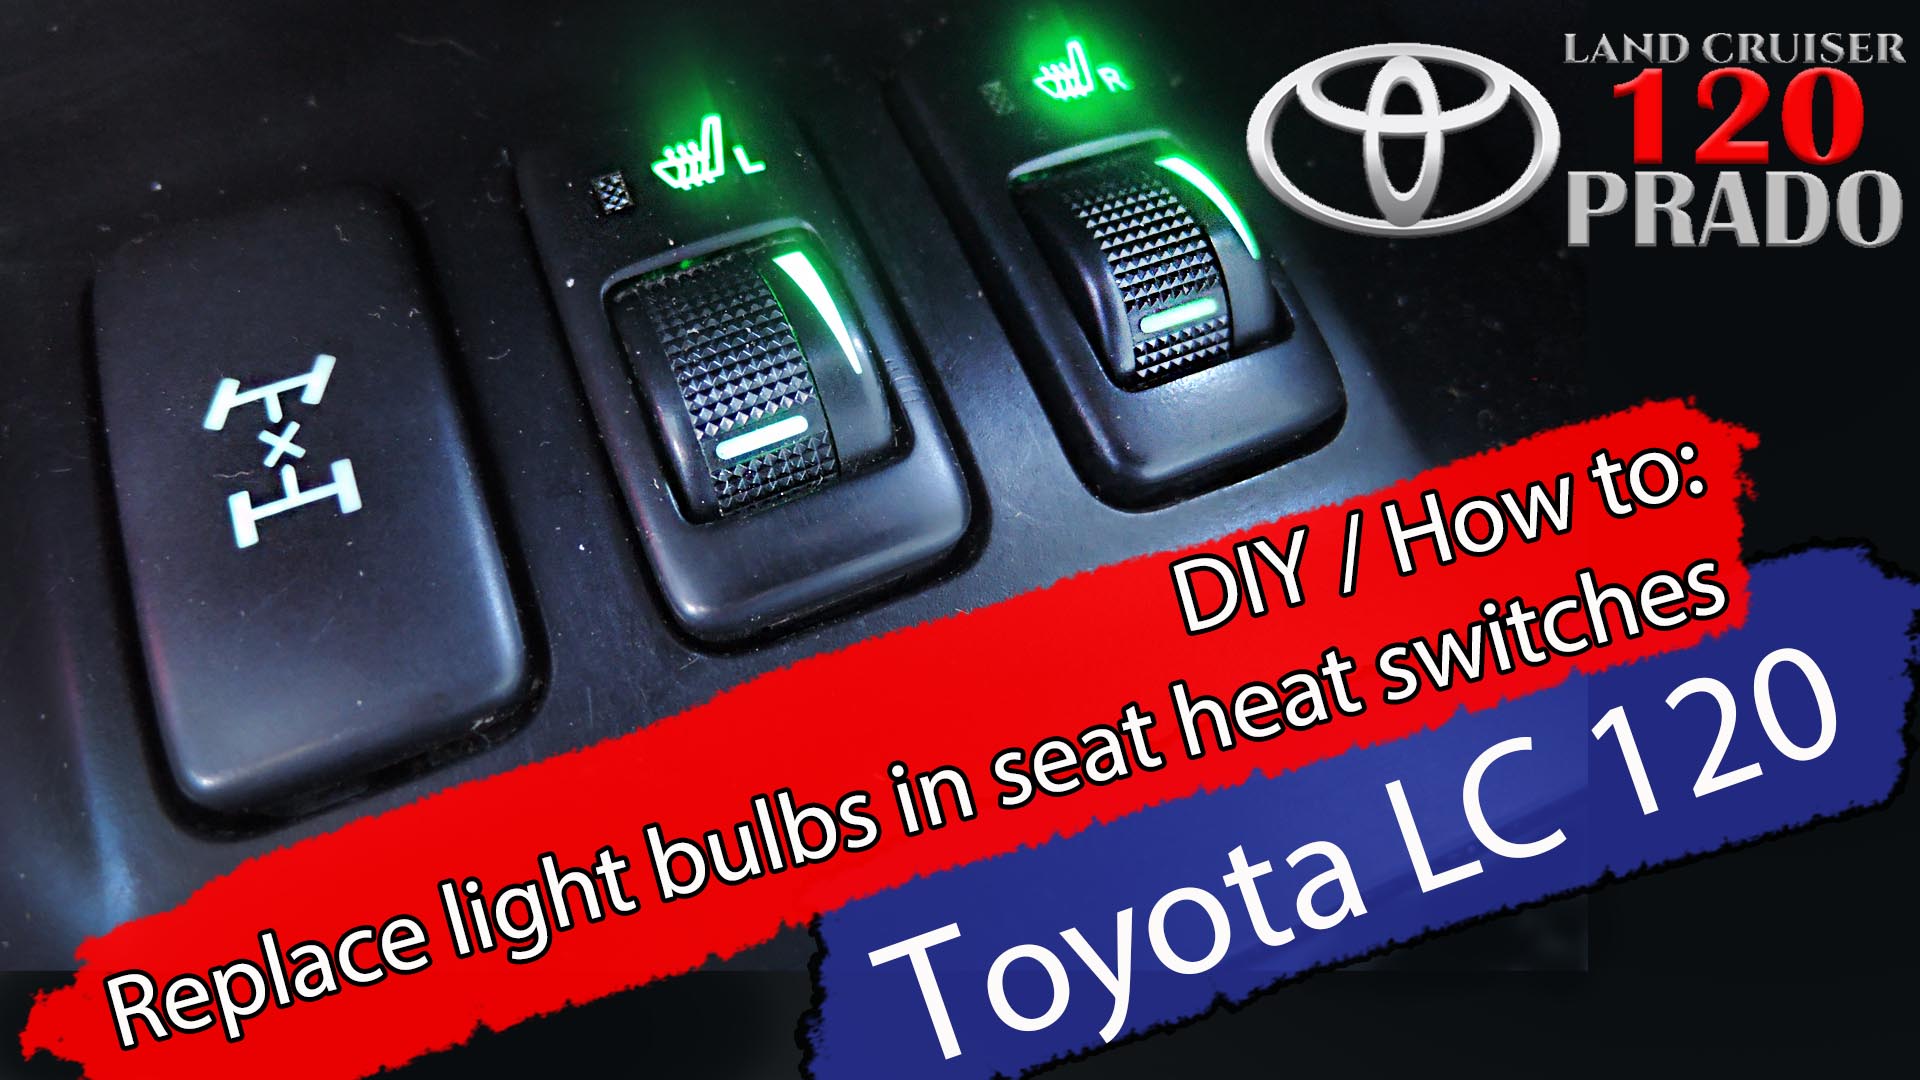 Replace light bulbs in seat heat switches – T3 LED – Toyota Land Cruiser / PRADO 120